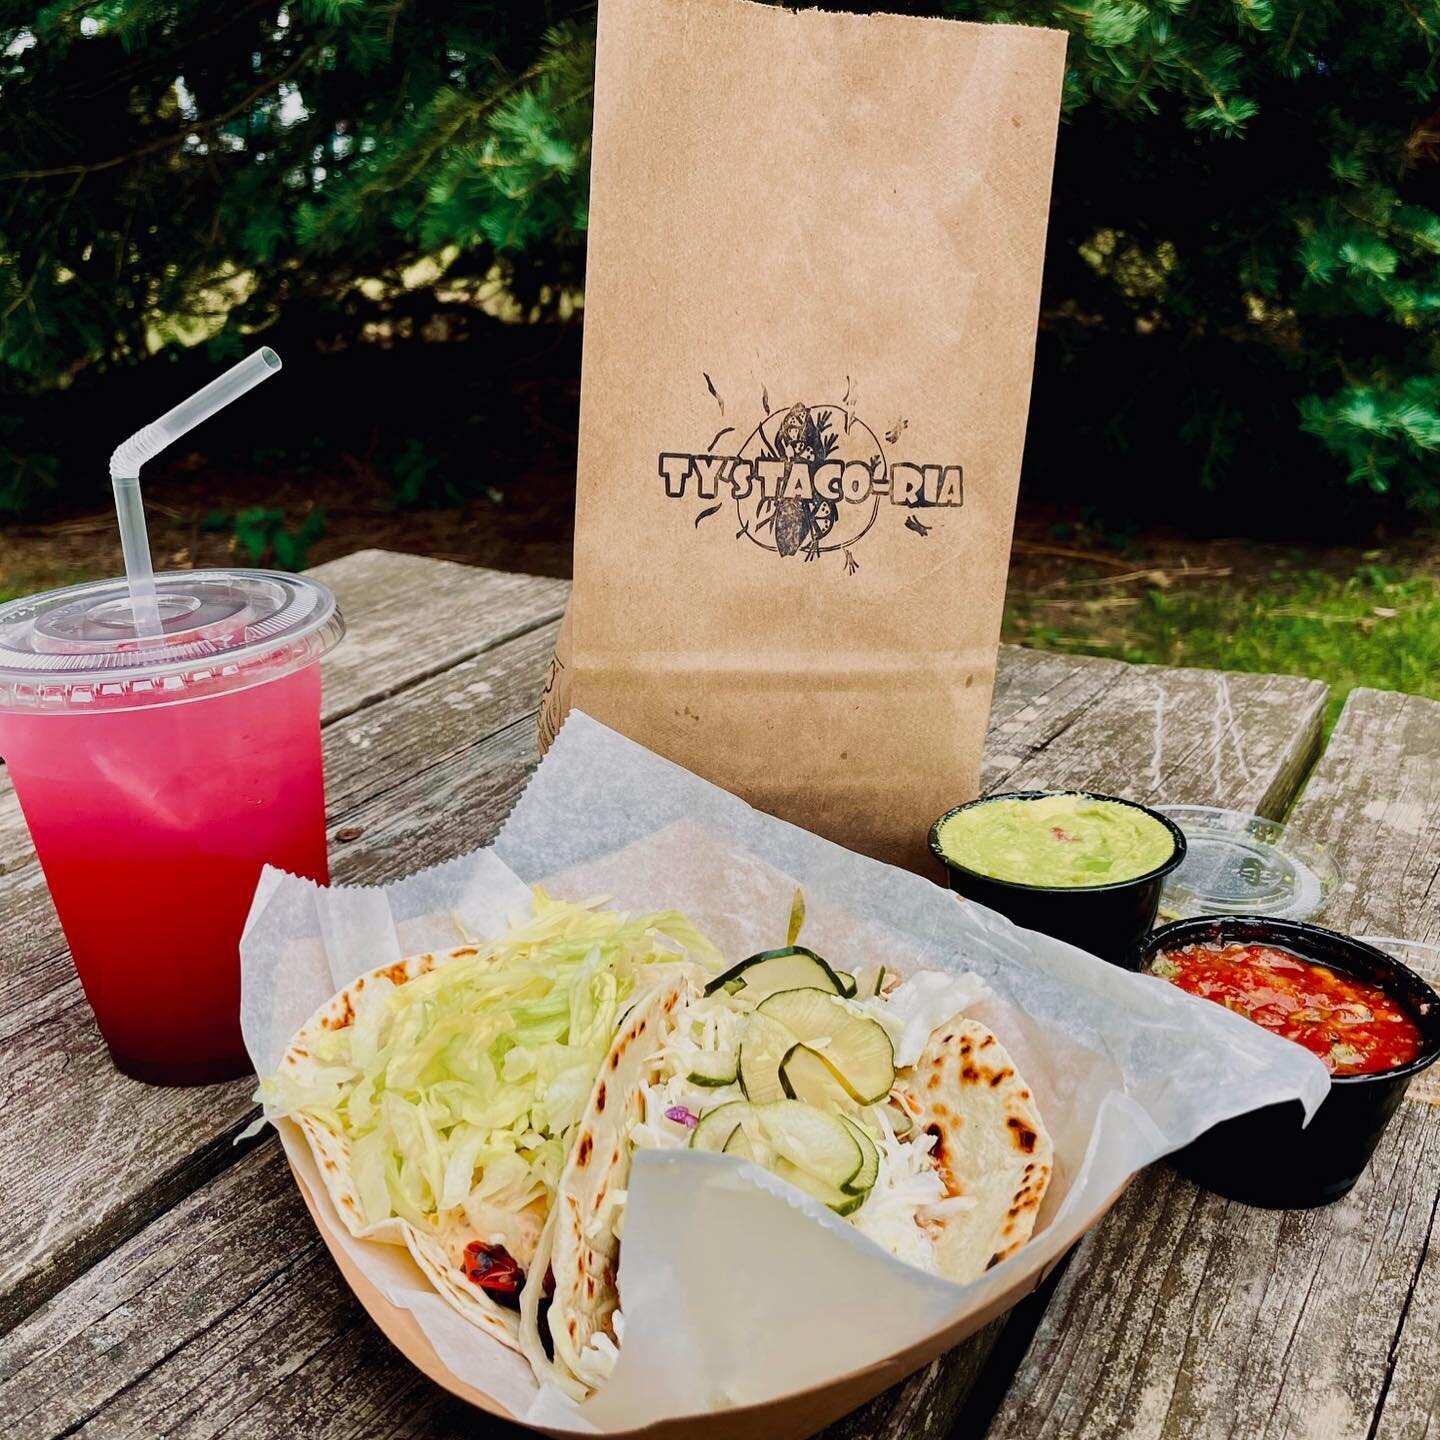 Our 2023 season starts tonight at 4pm!!! 🌮 we hope to see you tonight or sometime this weekend! 
🥬 tonight: 4-7 Delhi County Chamber of Commerce 
🍅 Saturday: 1-7 Muddy River 
🌶️Sunday: 12-6 Muddy river